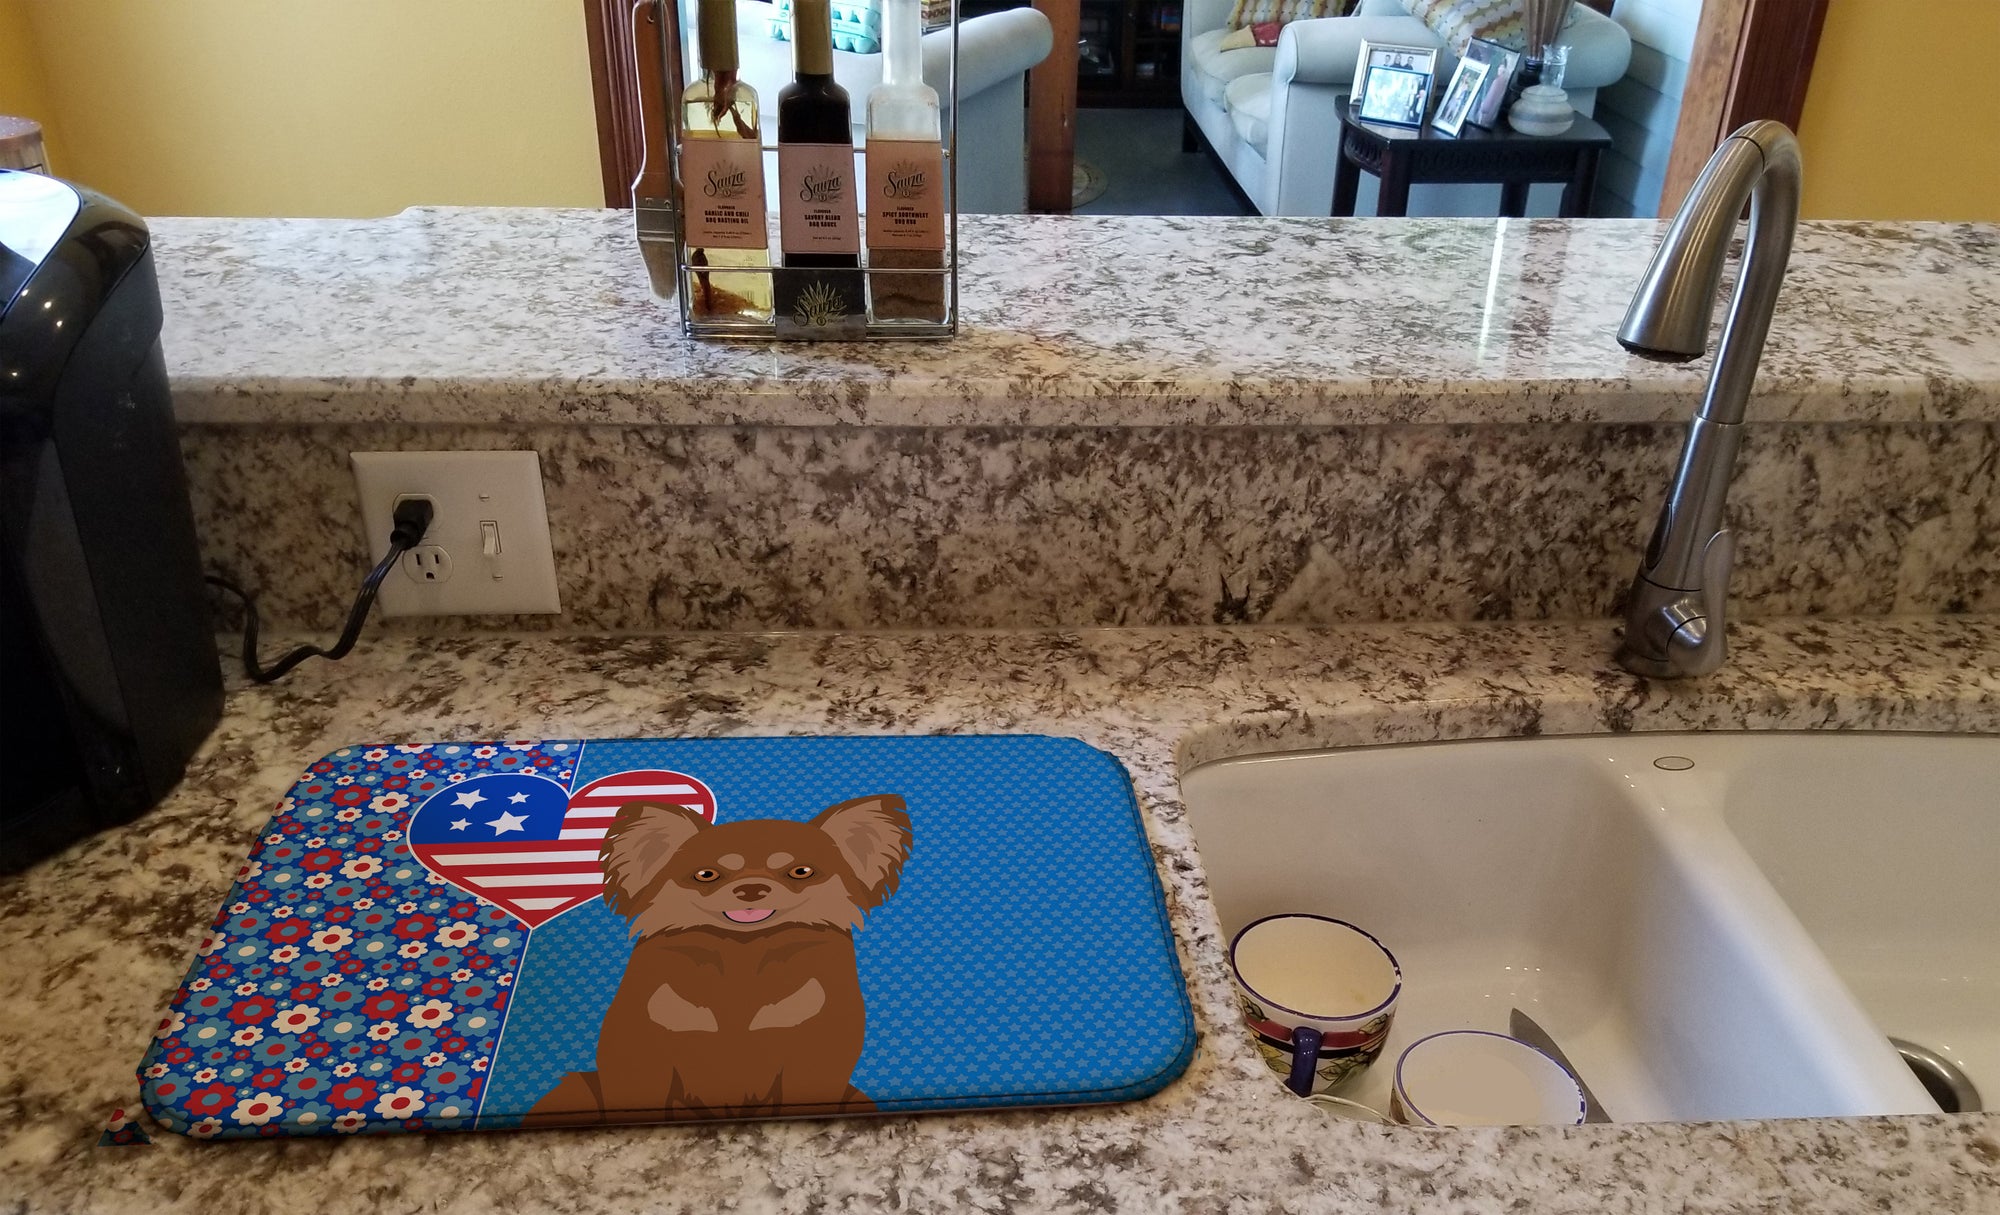 Longhaired Chocolate and Tan Chihuahua USA American Dish Drying Mat